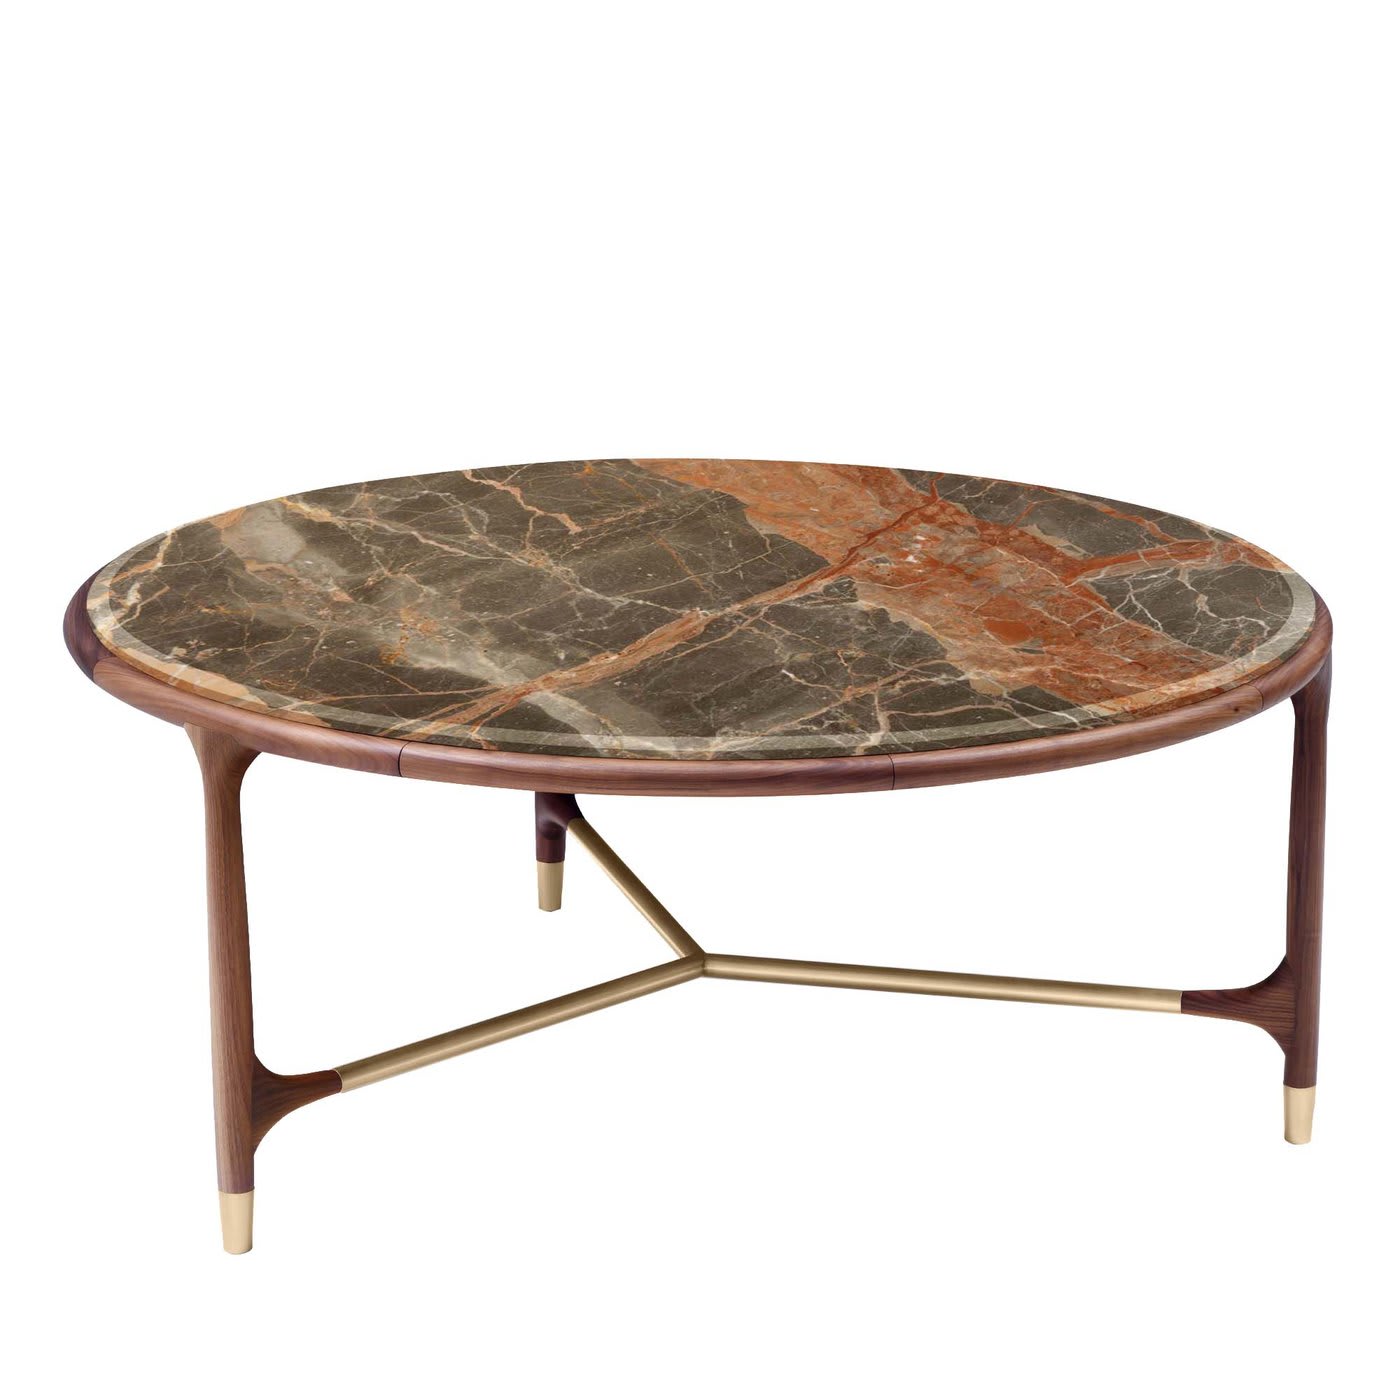 Elisee Round Table with Marble Top - Ulivi Salotti